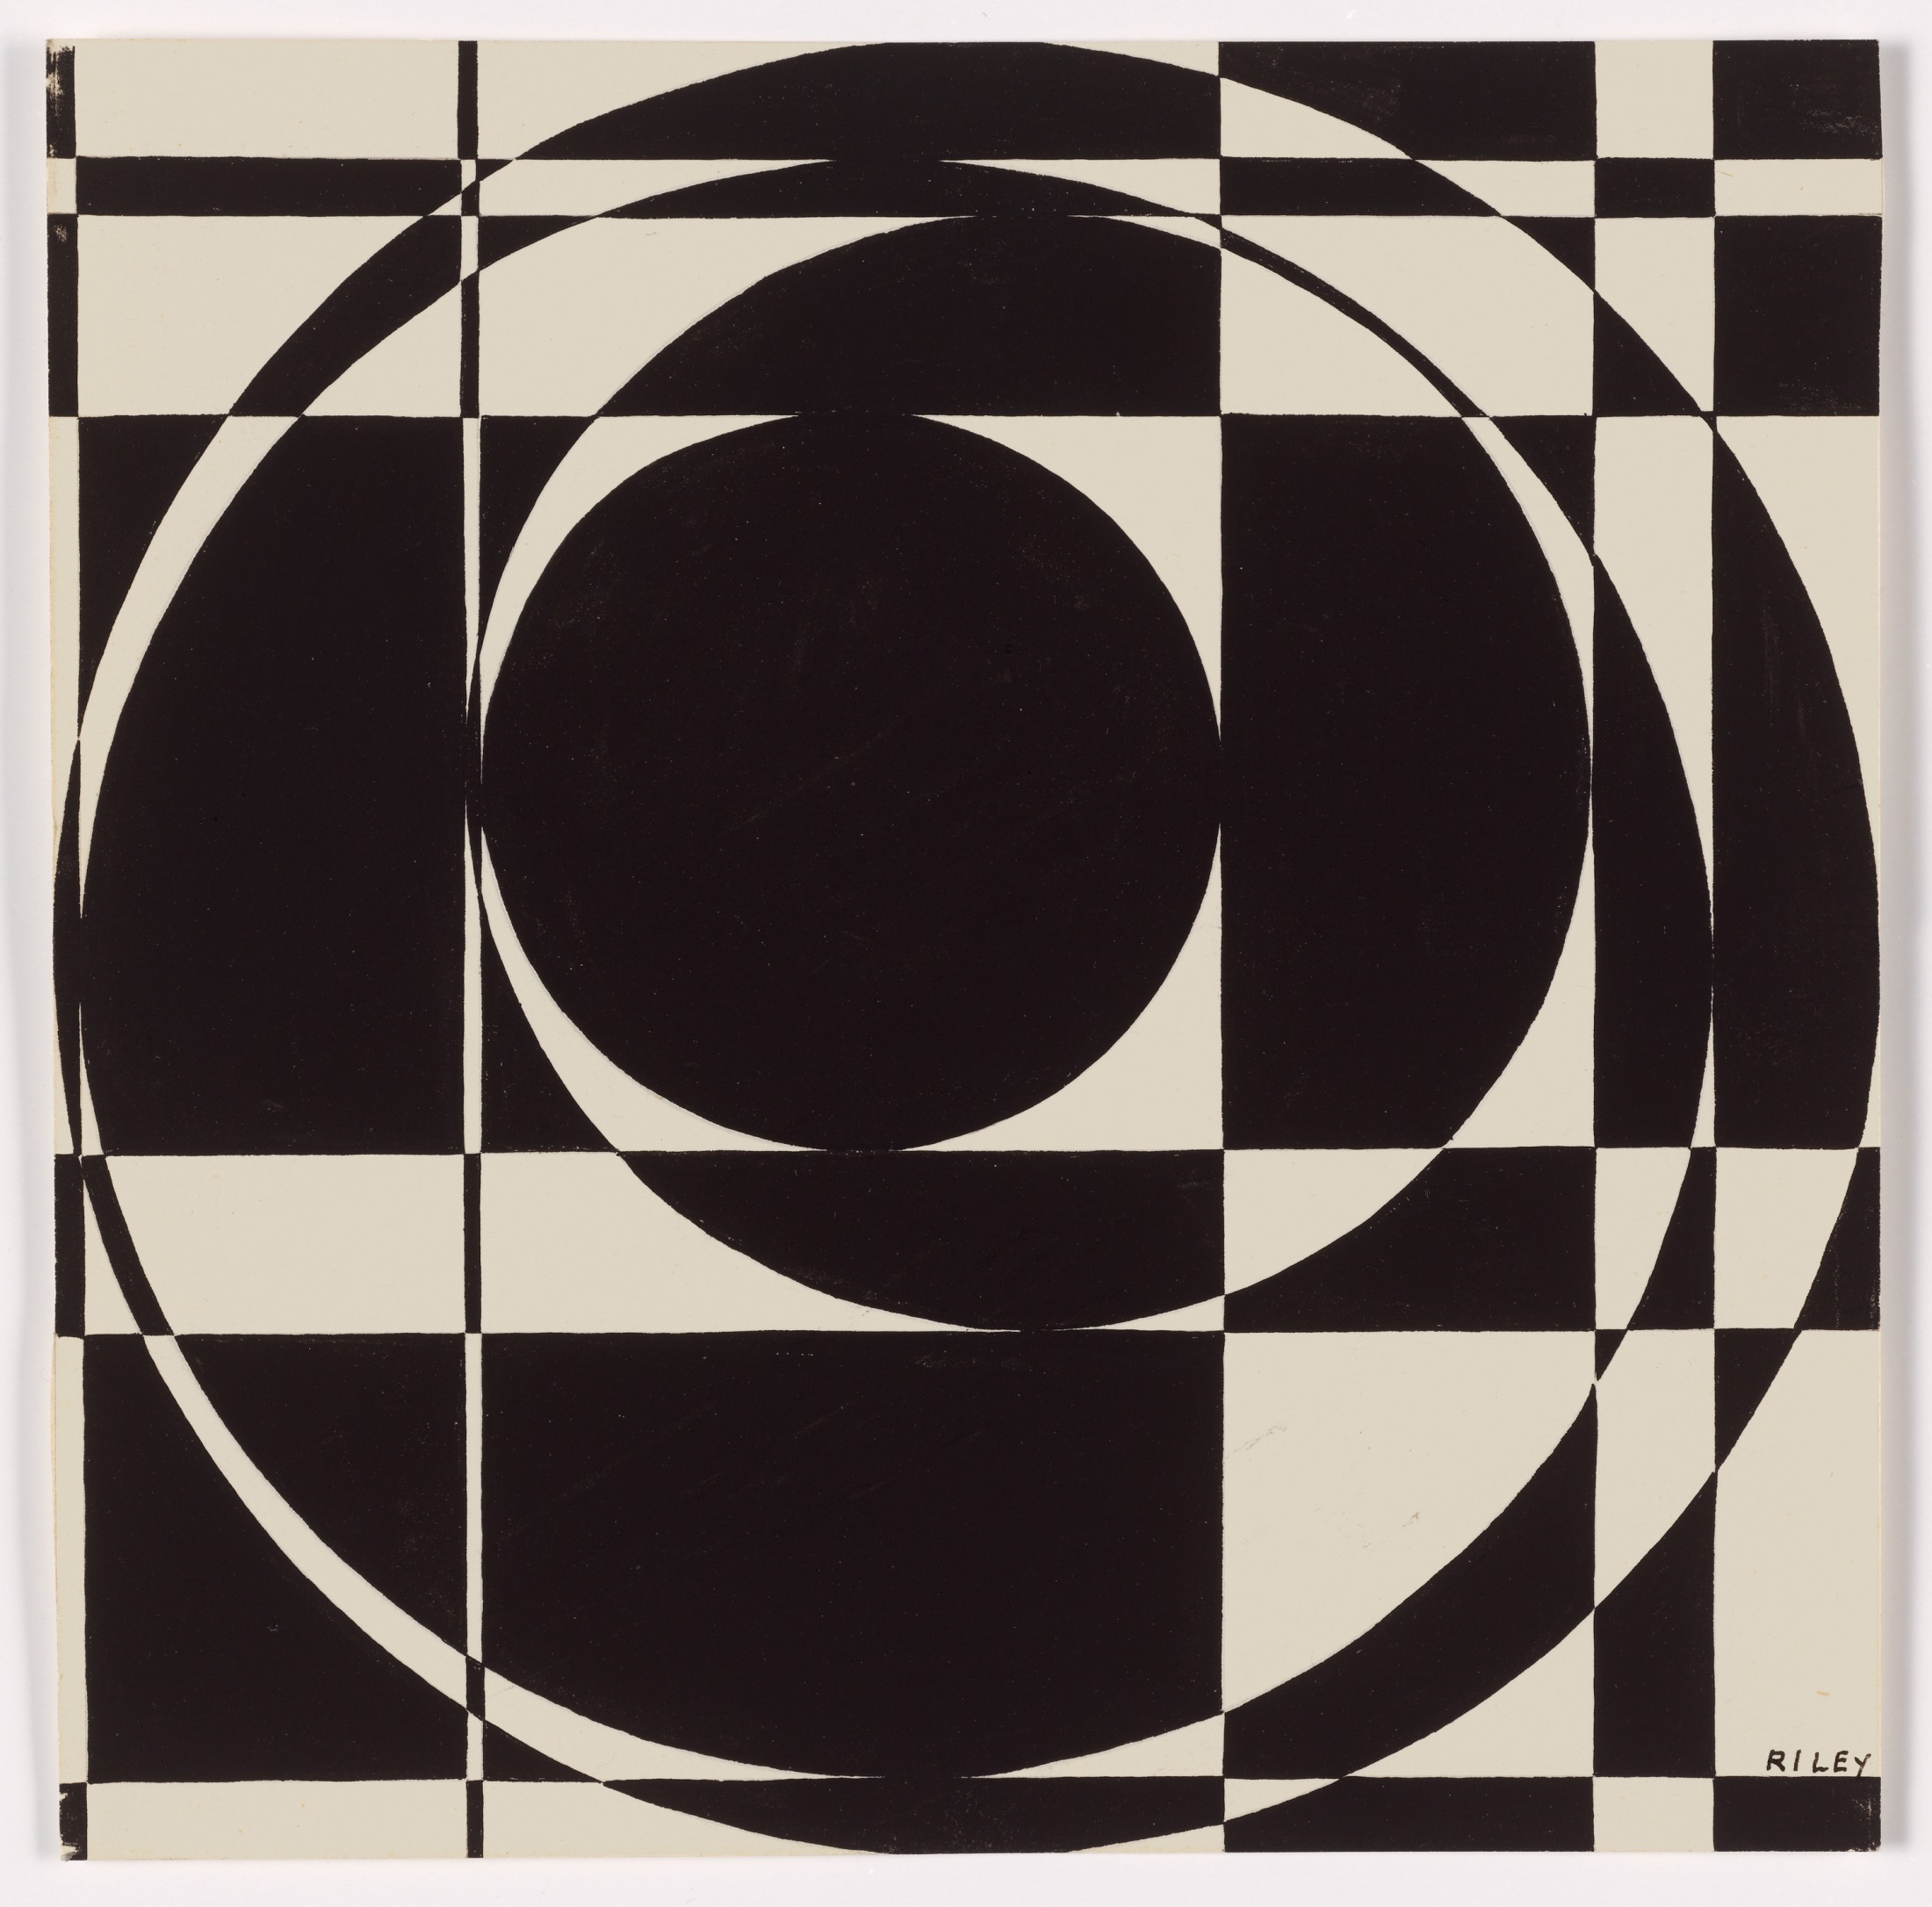 Bridget Riley, Untitled, 1960, collection of the artist, © Bridget Riley 2022, all rights reserved